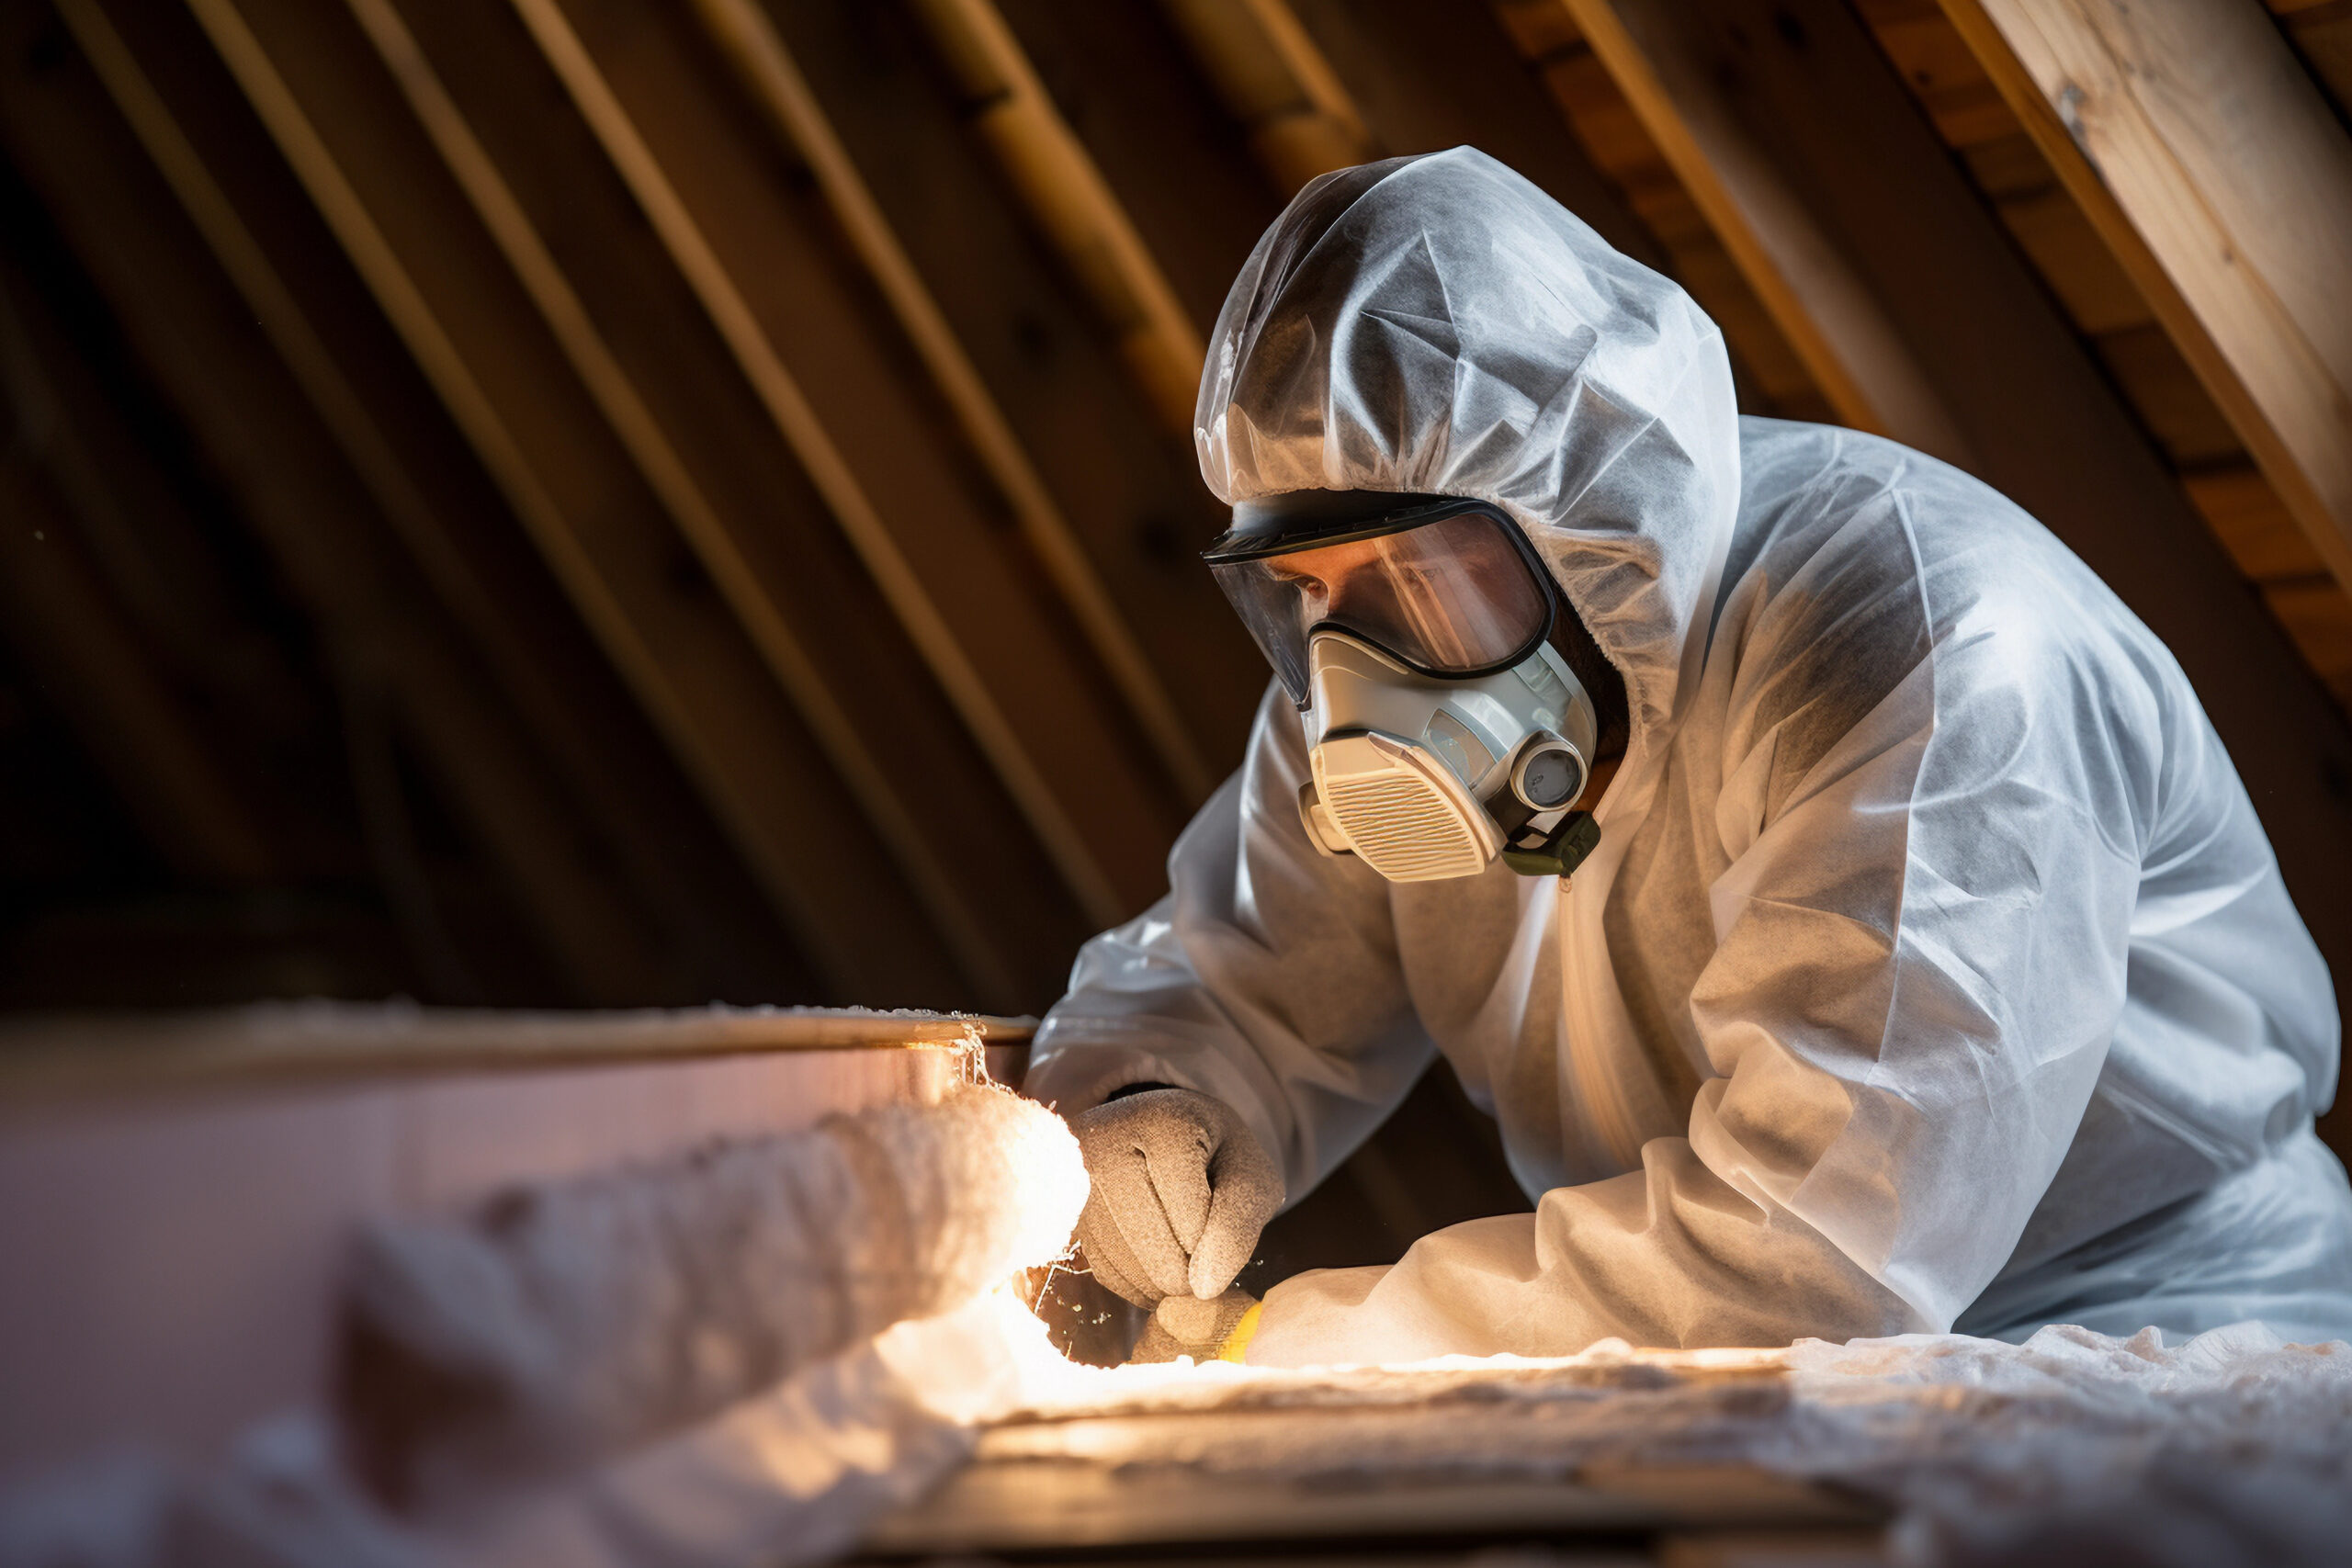 Worker in Protective Suit Installing Insulation in Attic Space